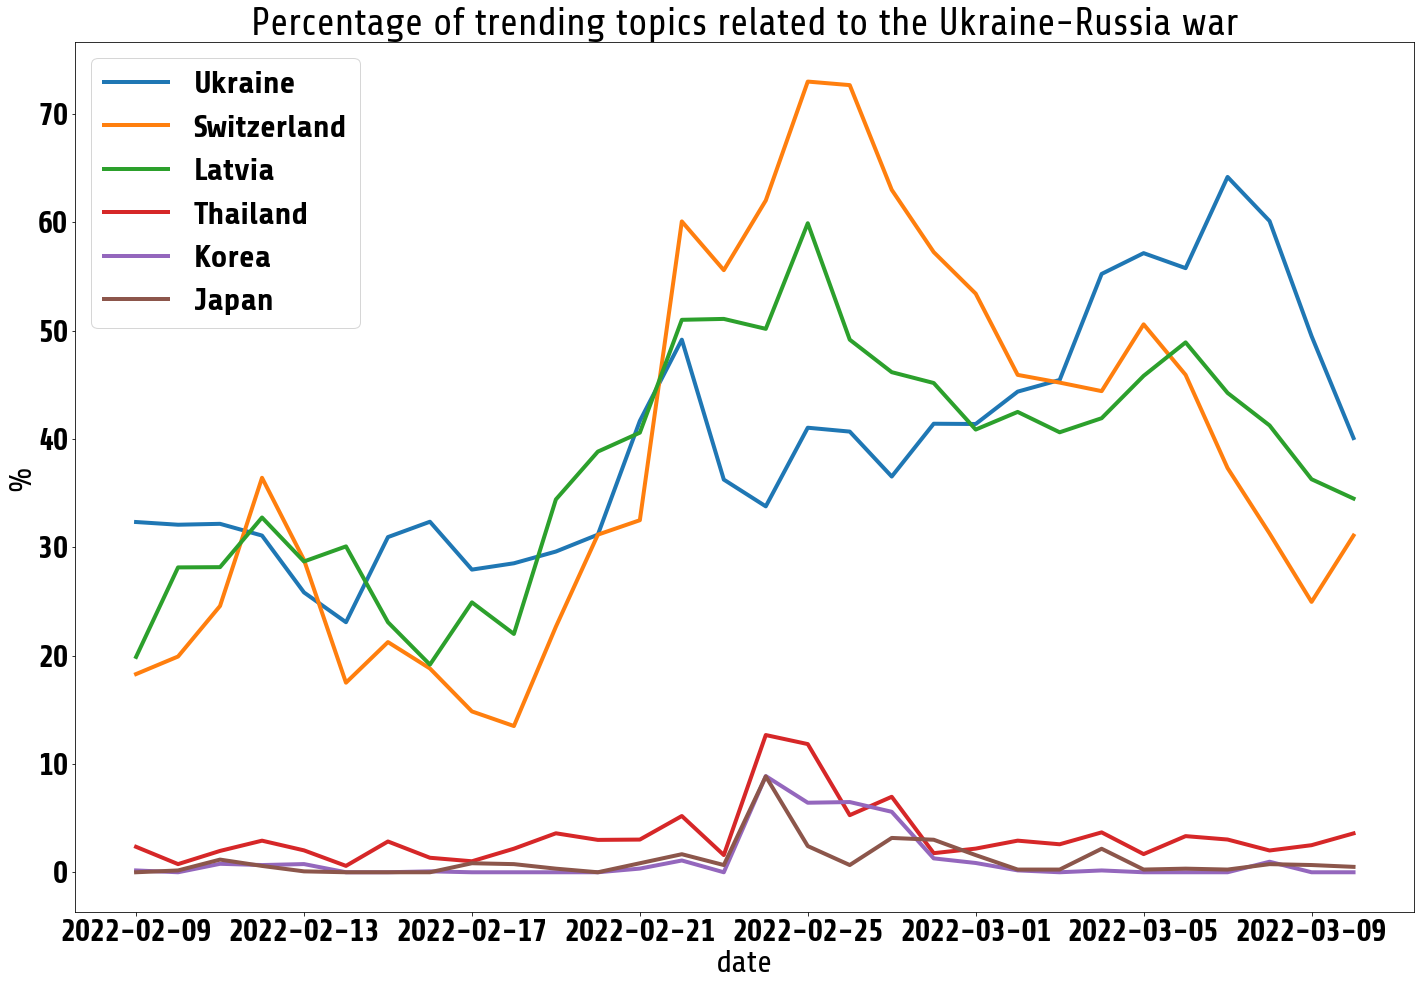 contries per number of trends related to Ukraine-Russia war per day